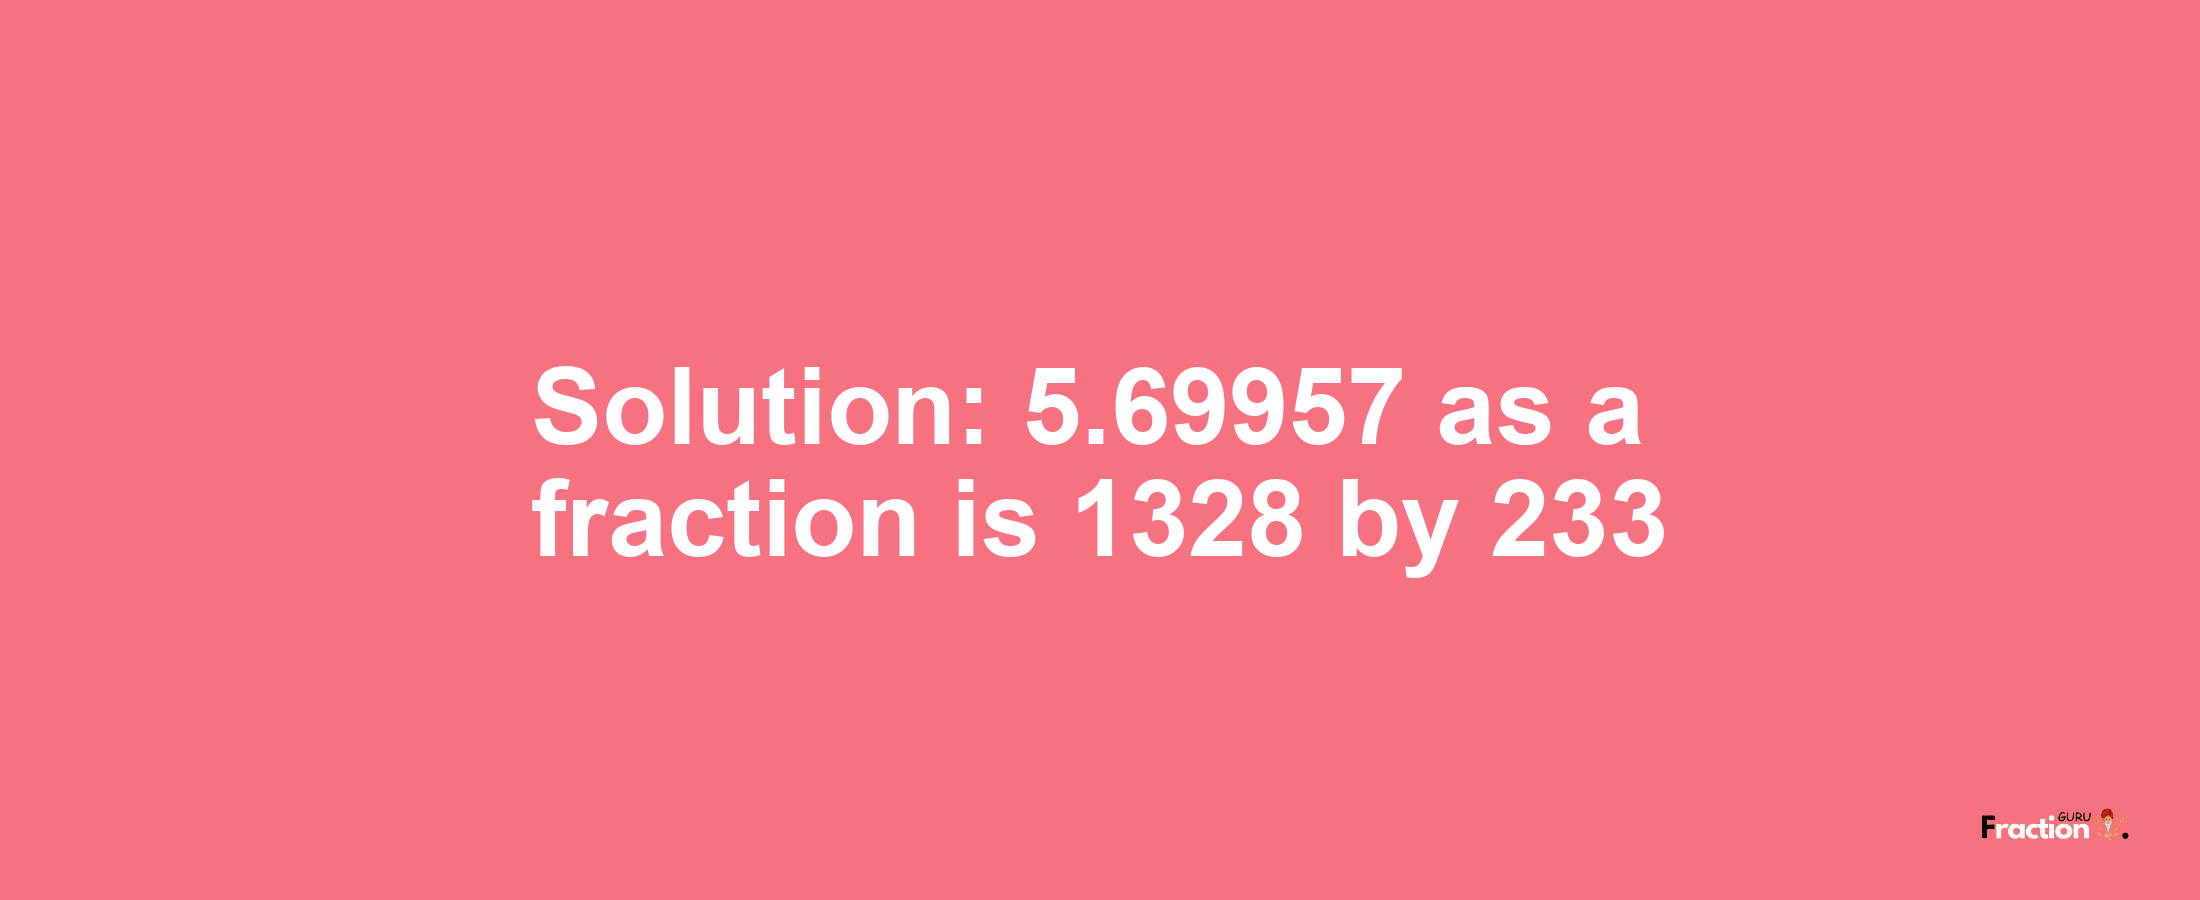 Solution:5.69957 as a fraction is 1328/233